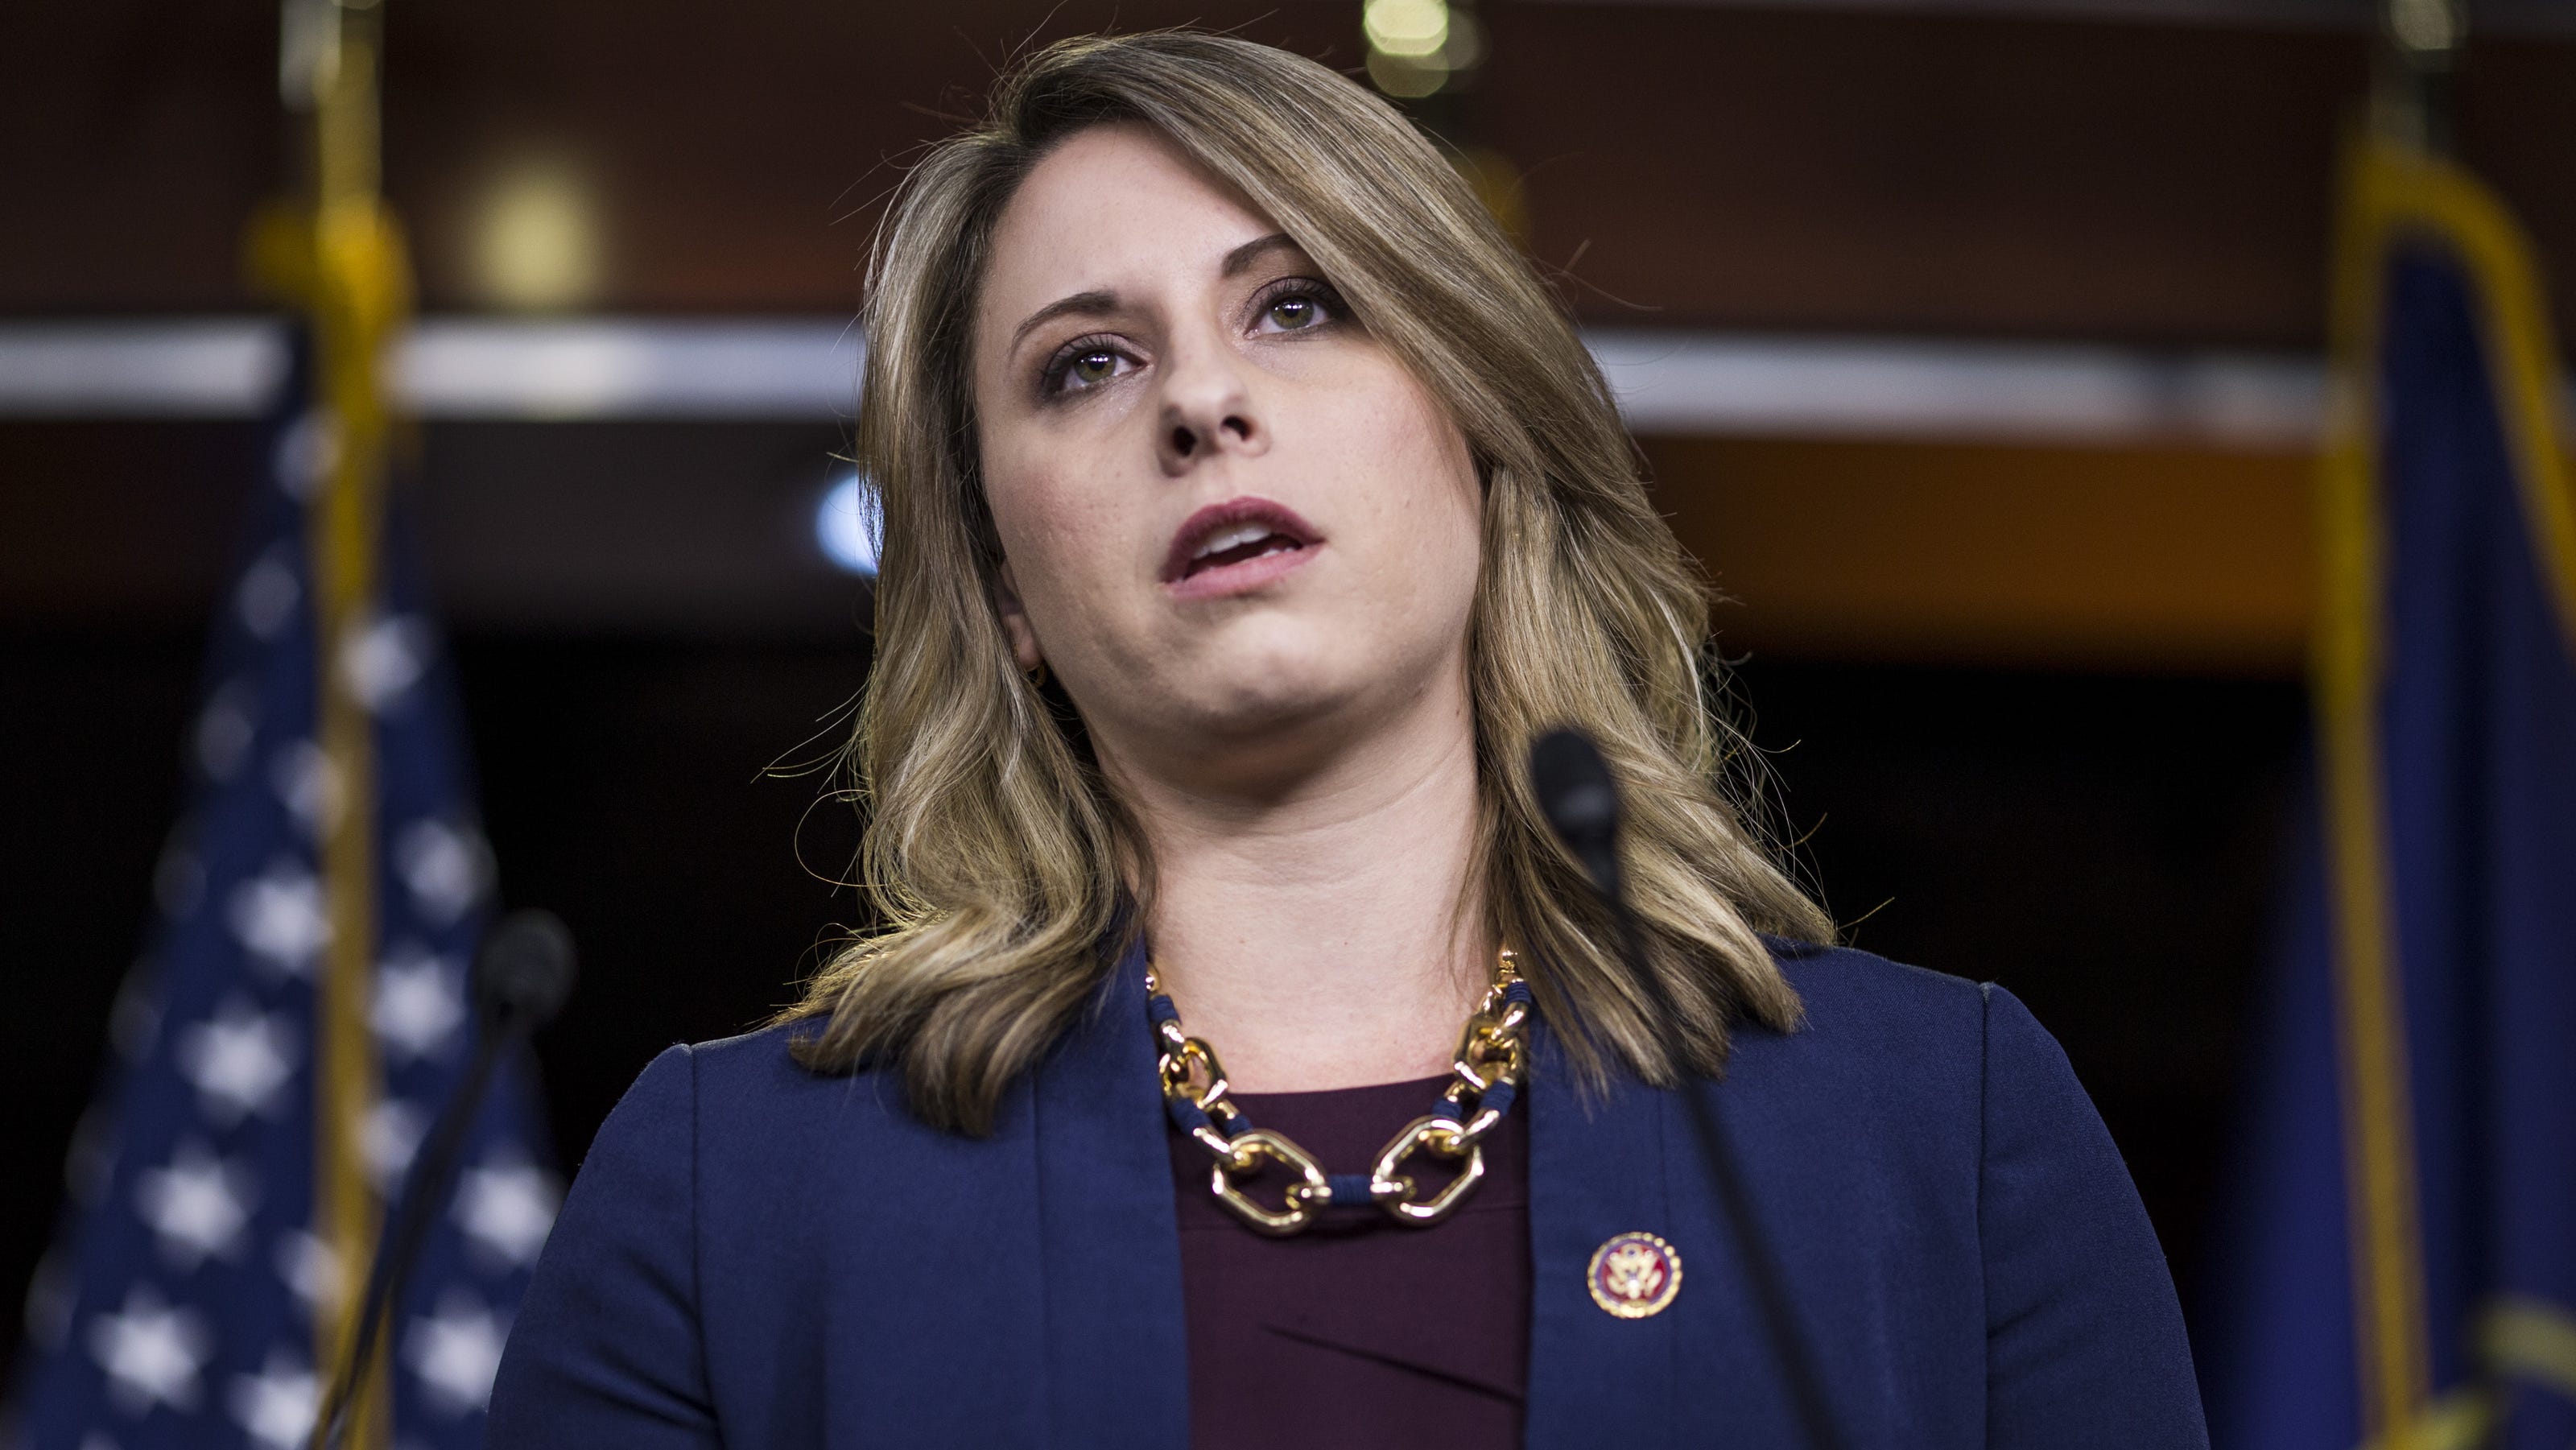 Revenge Porn Bisexual - Katie Hill resigns after nude photos. That reveals double standard